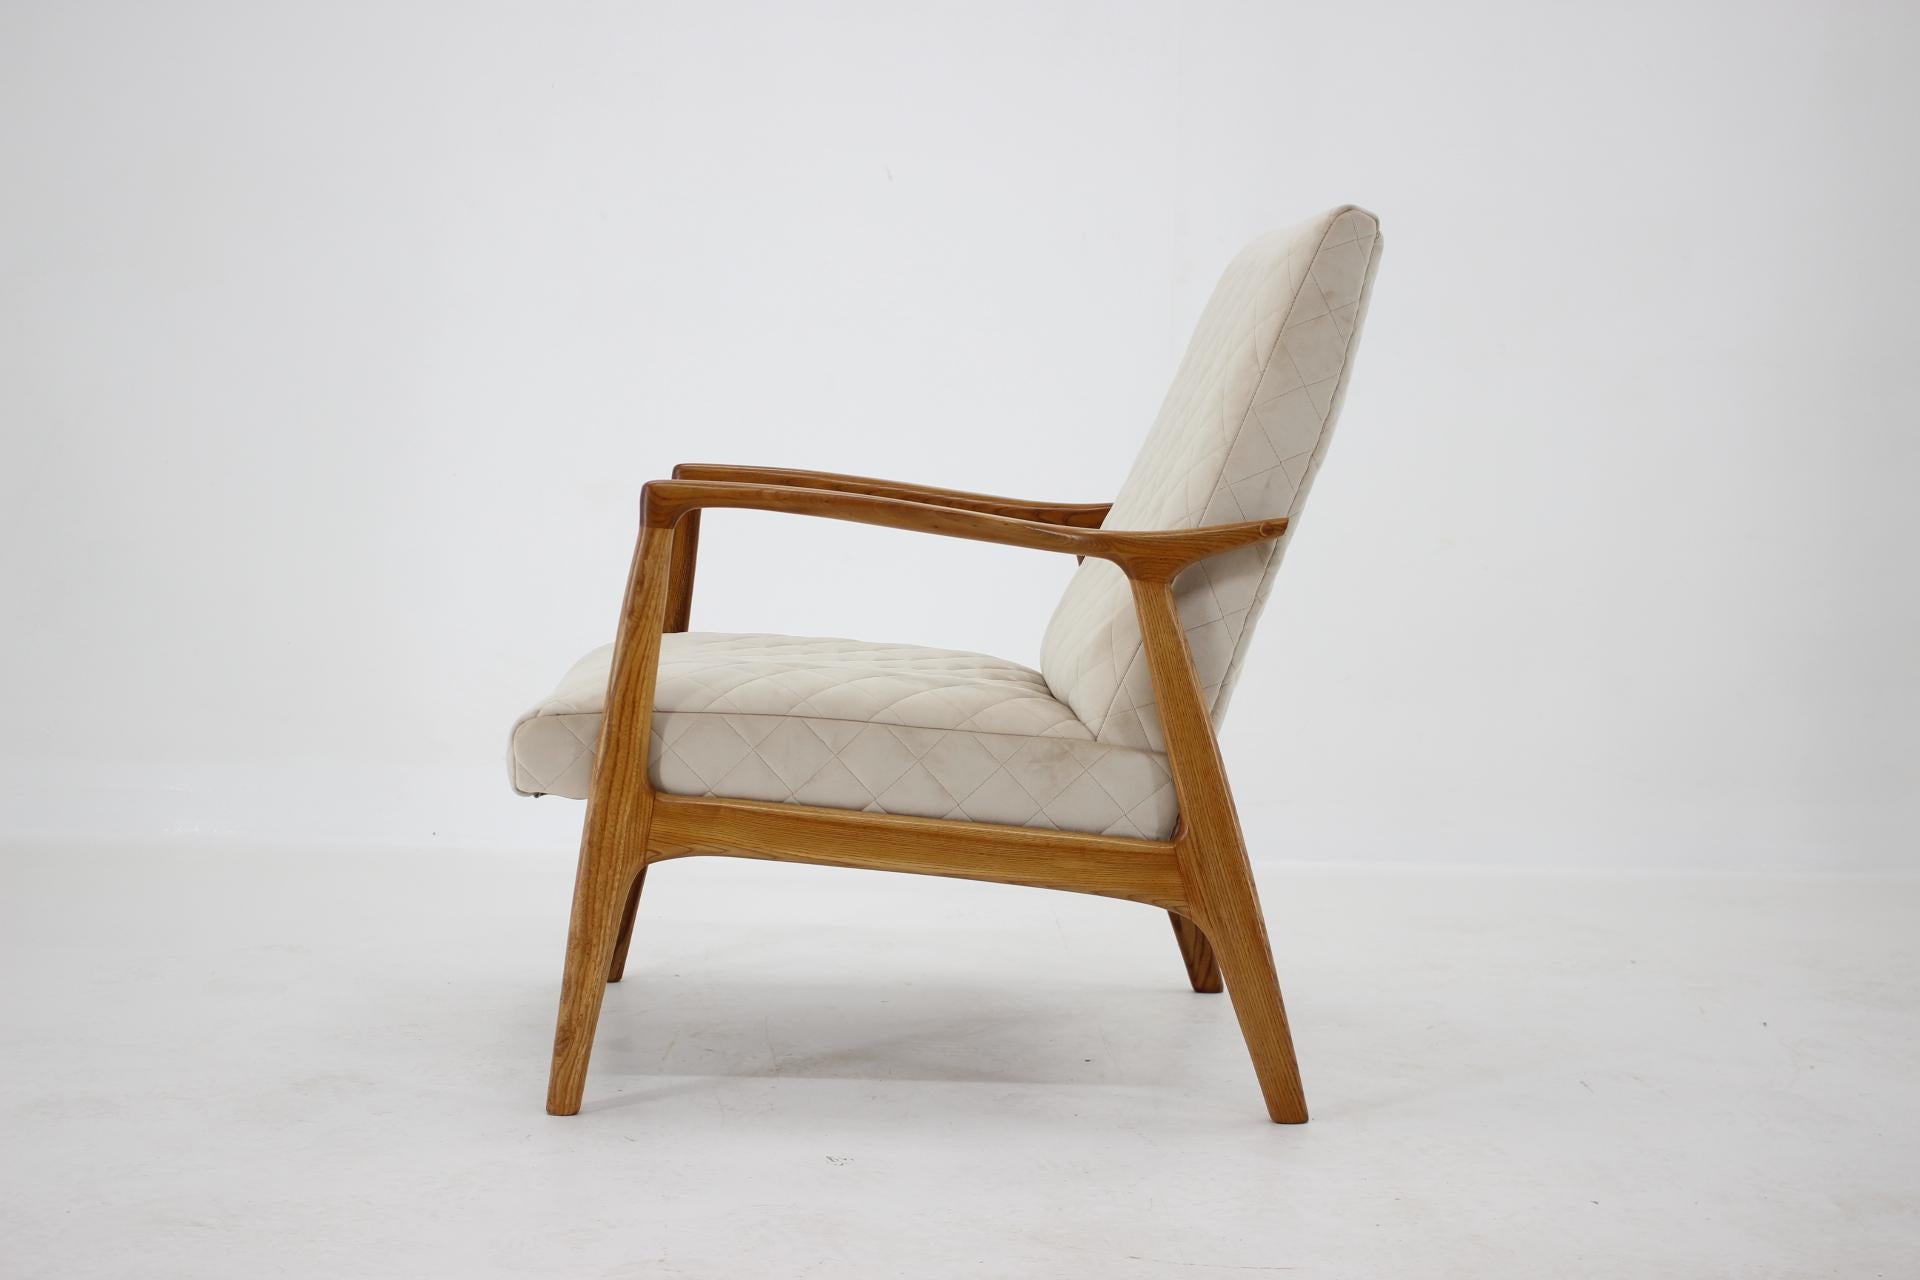 - Newly upholstered 
- The wooden parts have been repolished 
- Height of seat 39cm.